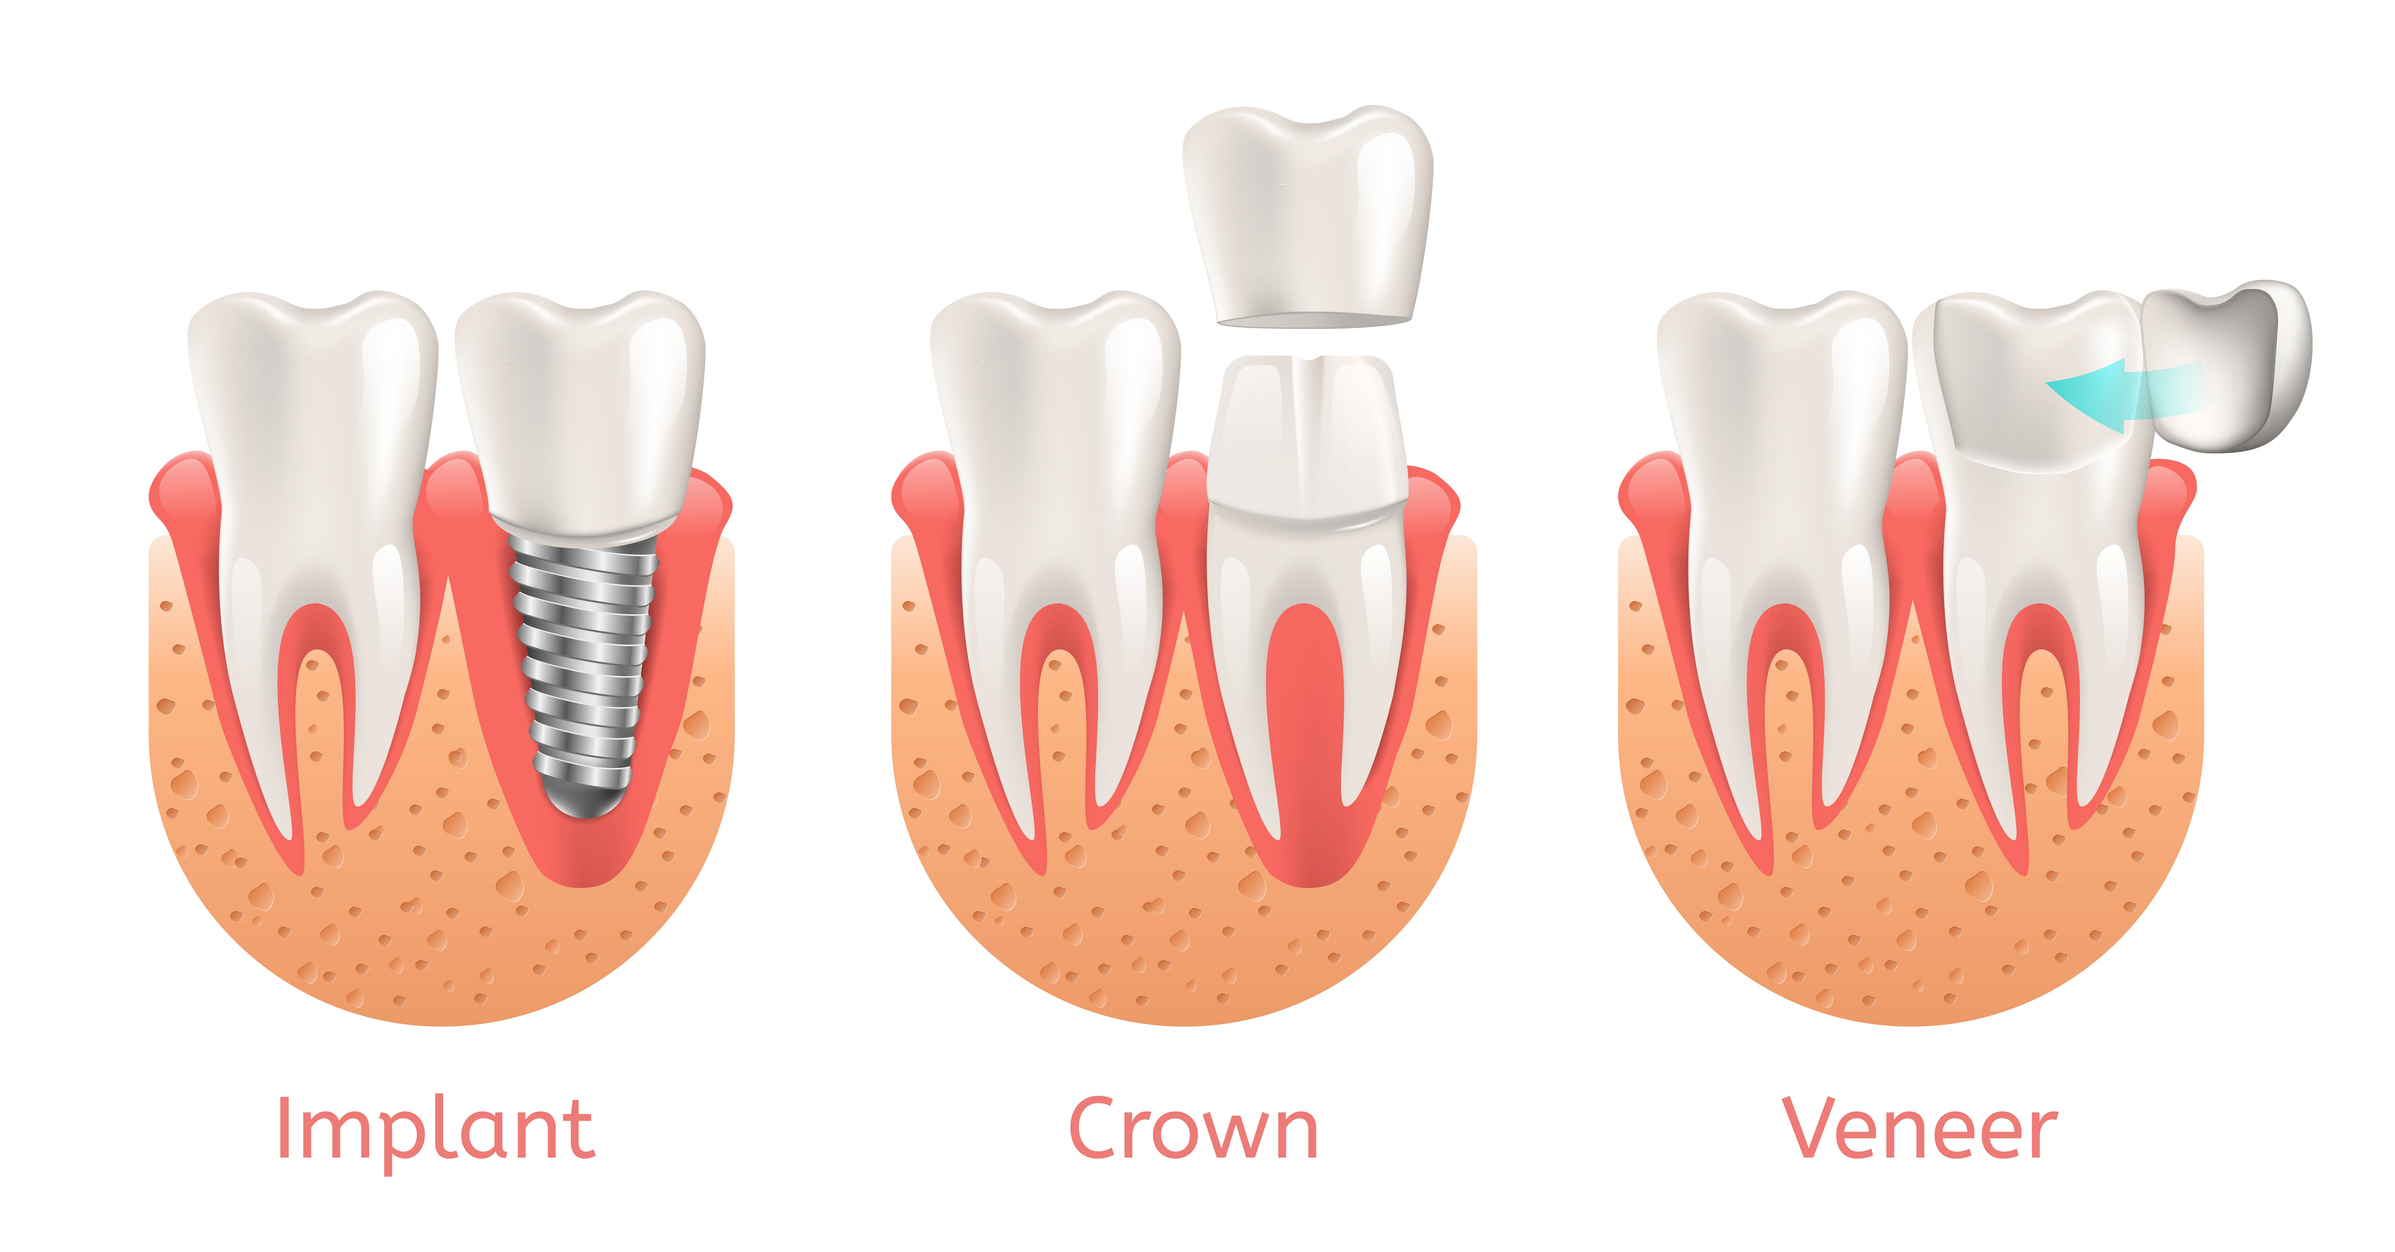 Three examples of what a dental implant, dental crown, and a veneer look like.